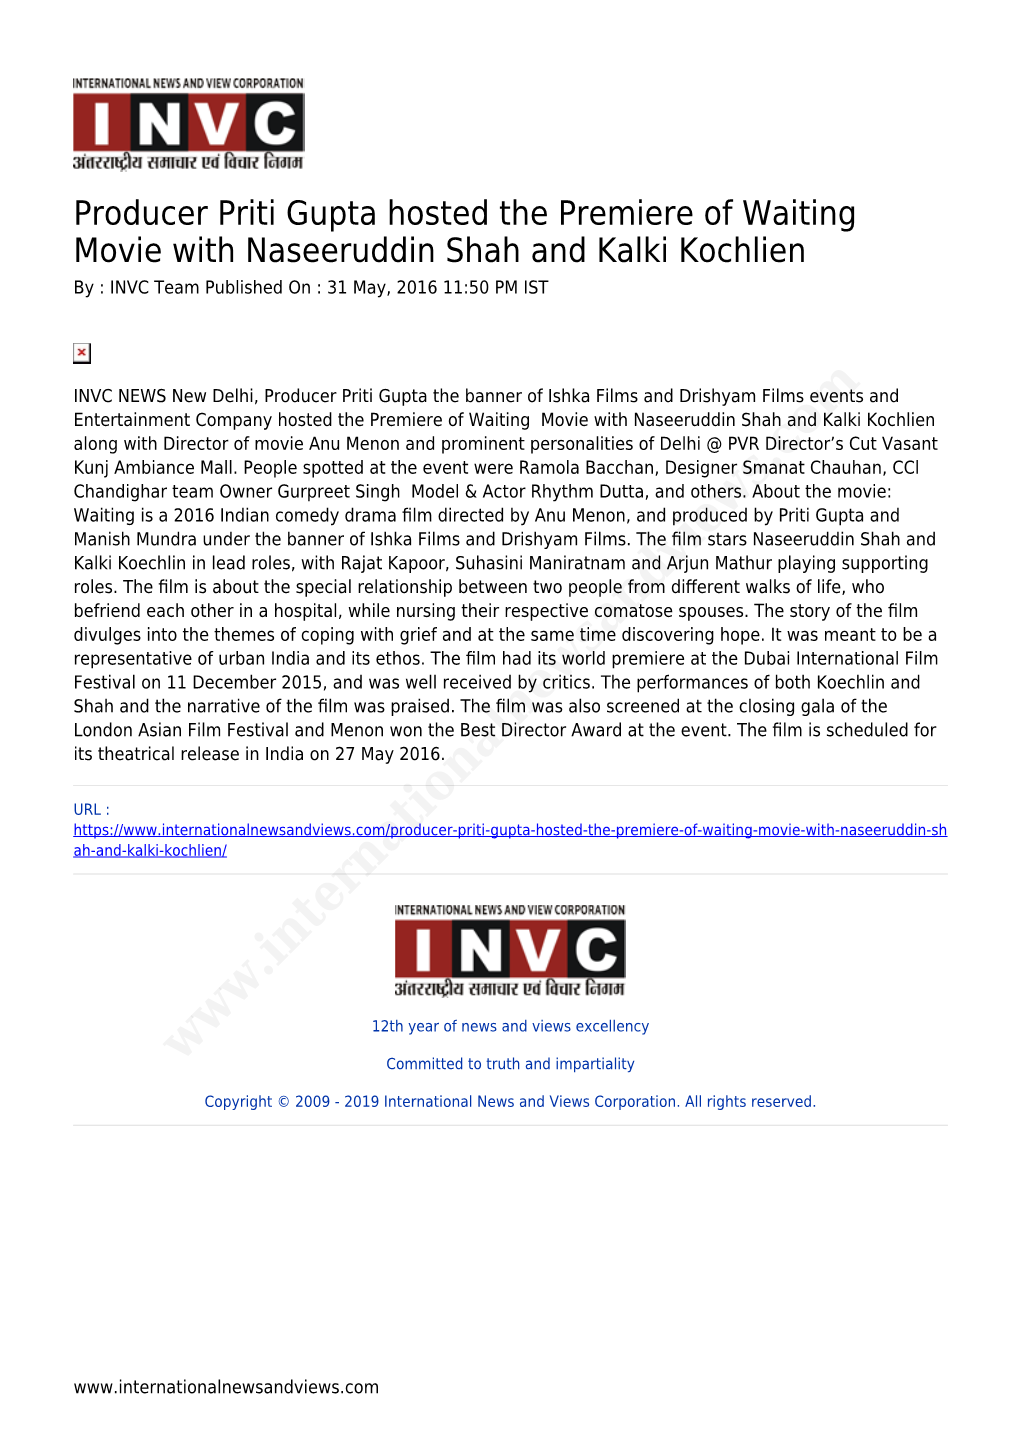 Producer Priti Gupta Hosted the Premiere of Waiting Movie with Naseeruddin Shah and Kalki Kochlien by : INVC Team Published on : 31 May, 2016 11:50 PM IST